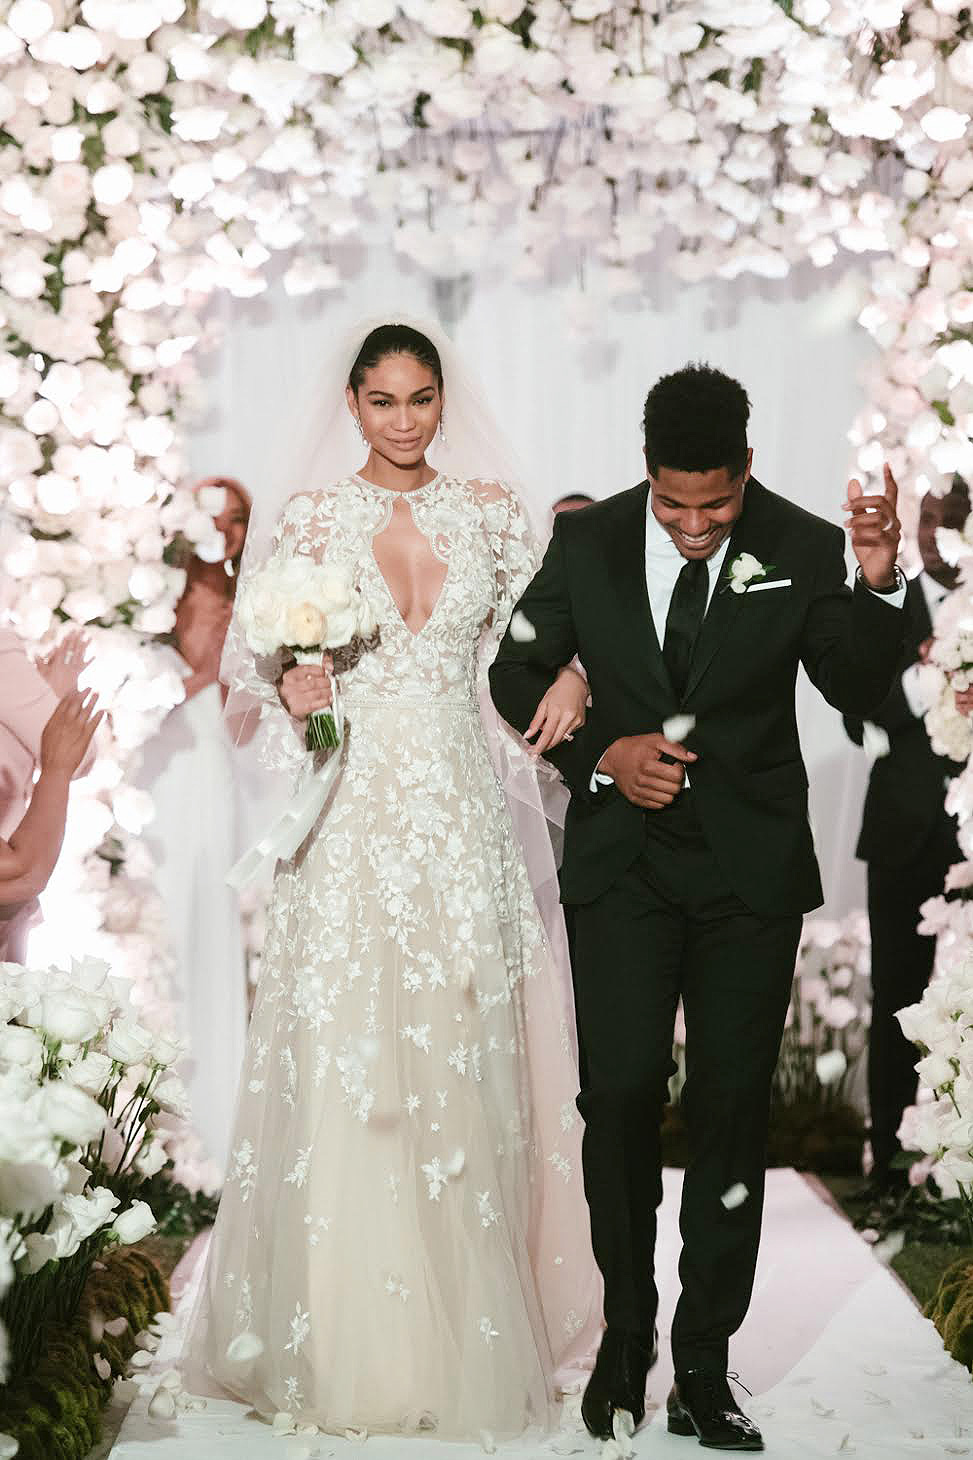 Chanel Iman Marries Sterling Shepard: See Her Dress More Pics